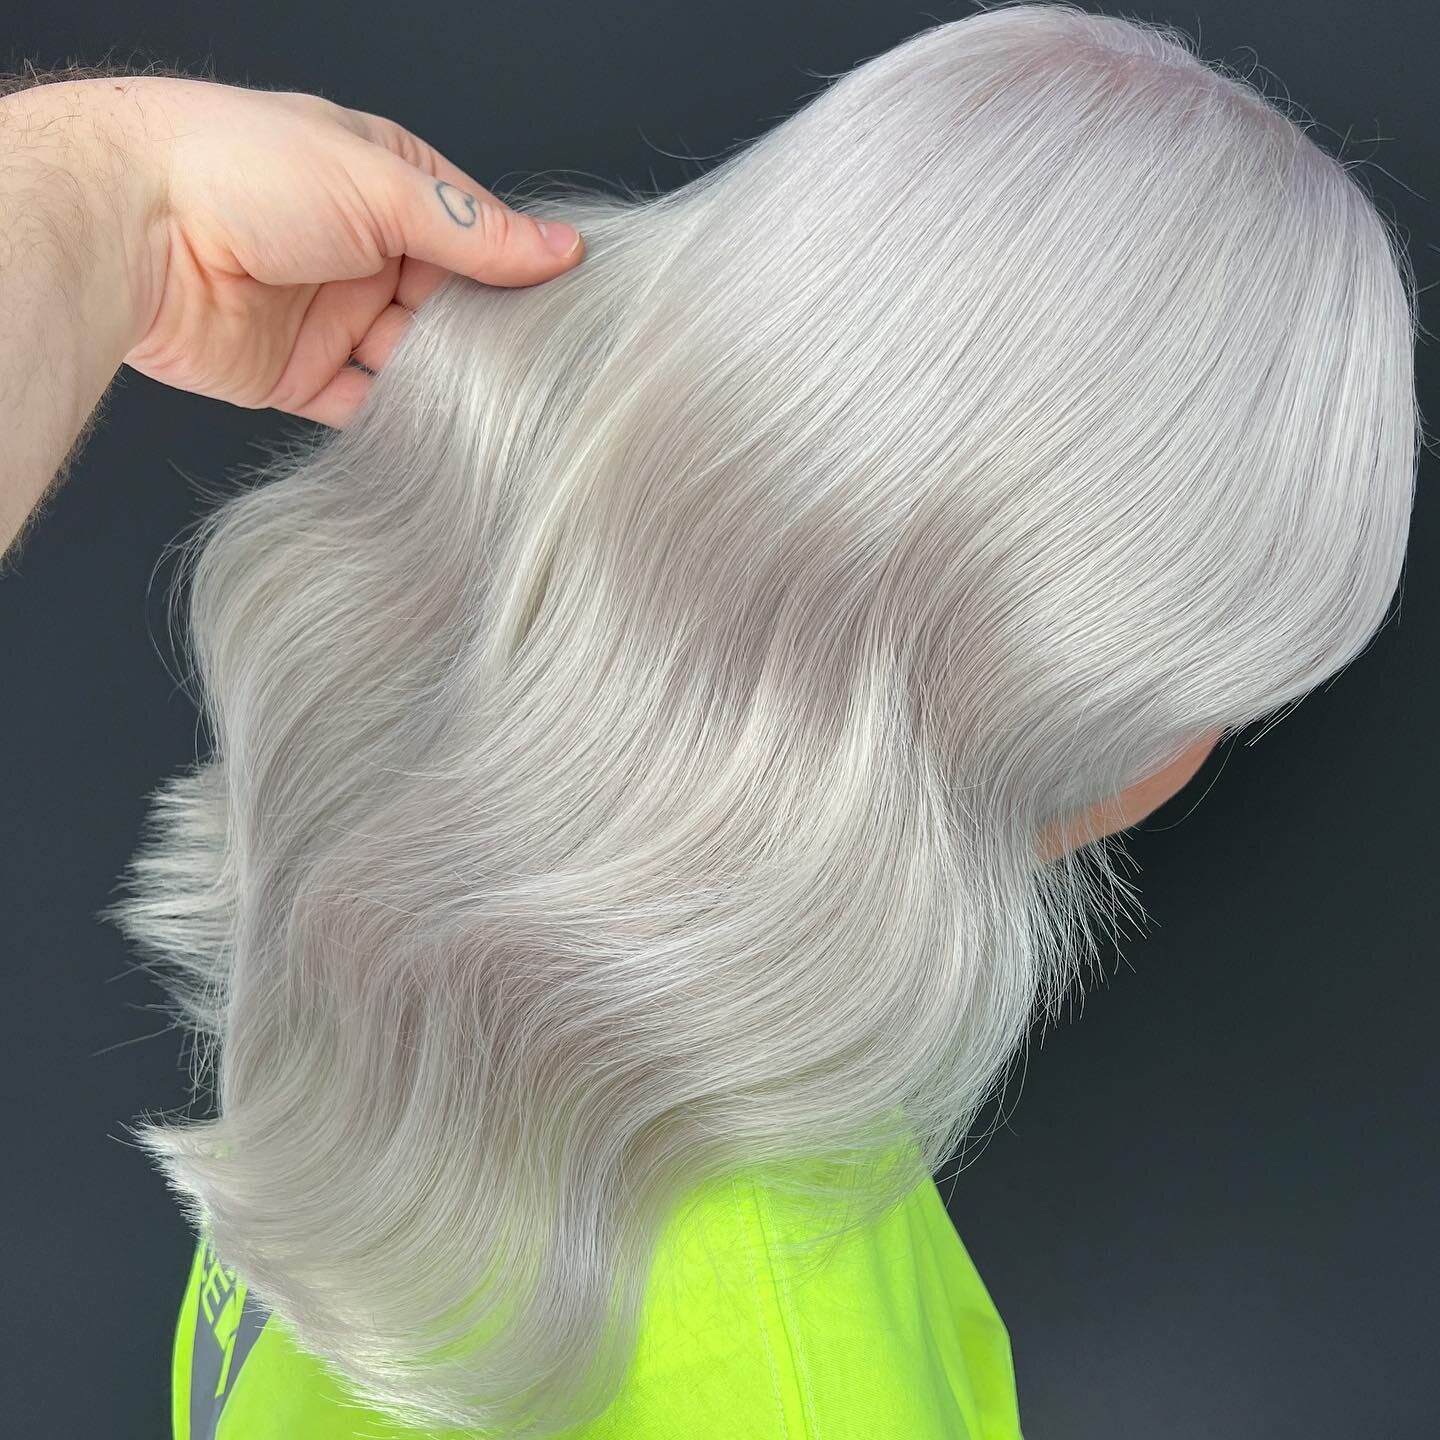 Breaking my social media silence for this bombshell.
I&rsquo;m a sucker for platinum hair.
Swipe to see the toner that almost made Kelly poop her pants.
@blondesolutions we really love you.